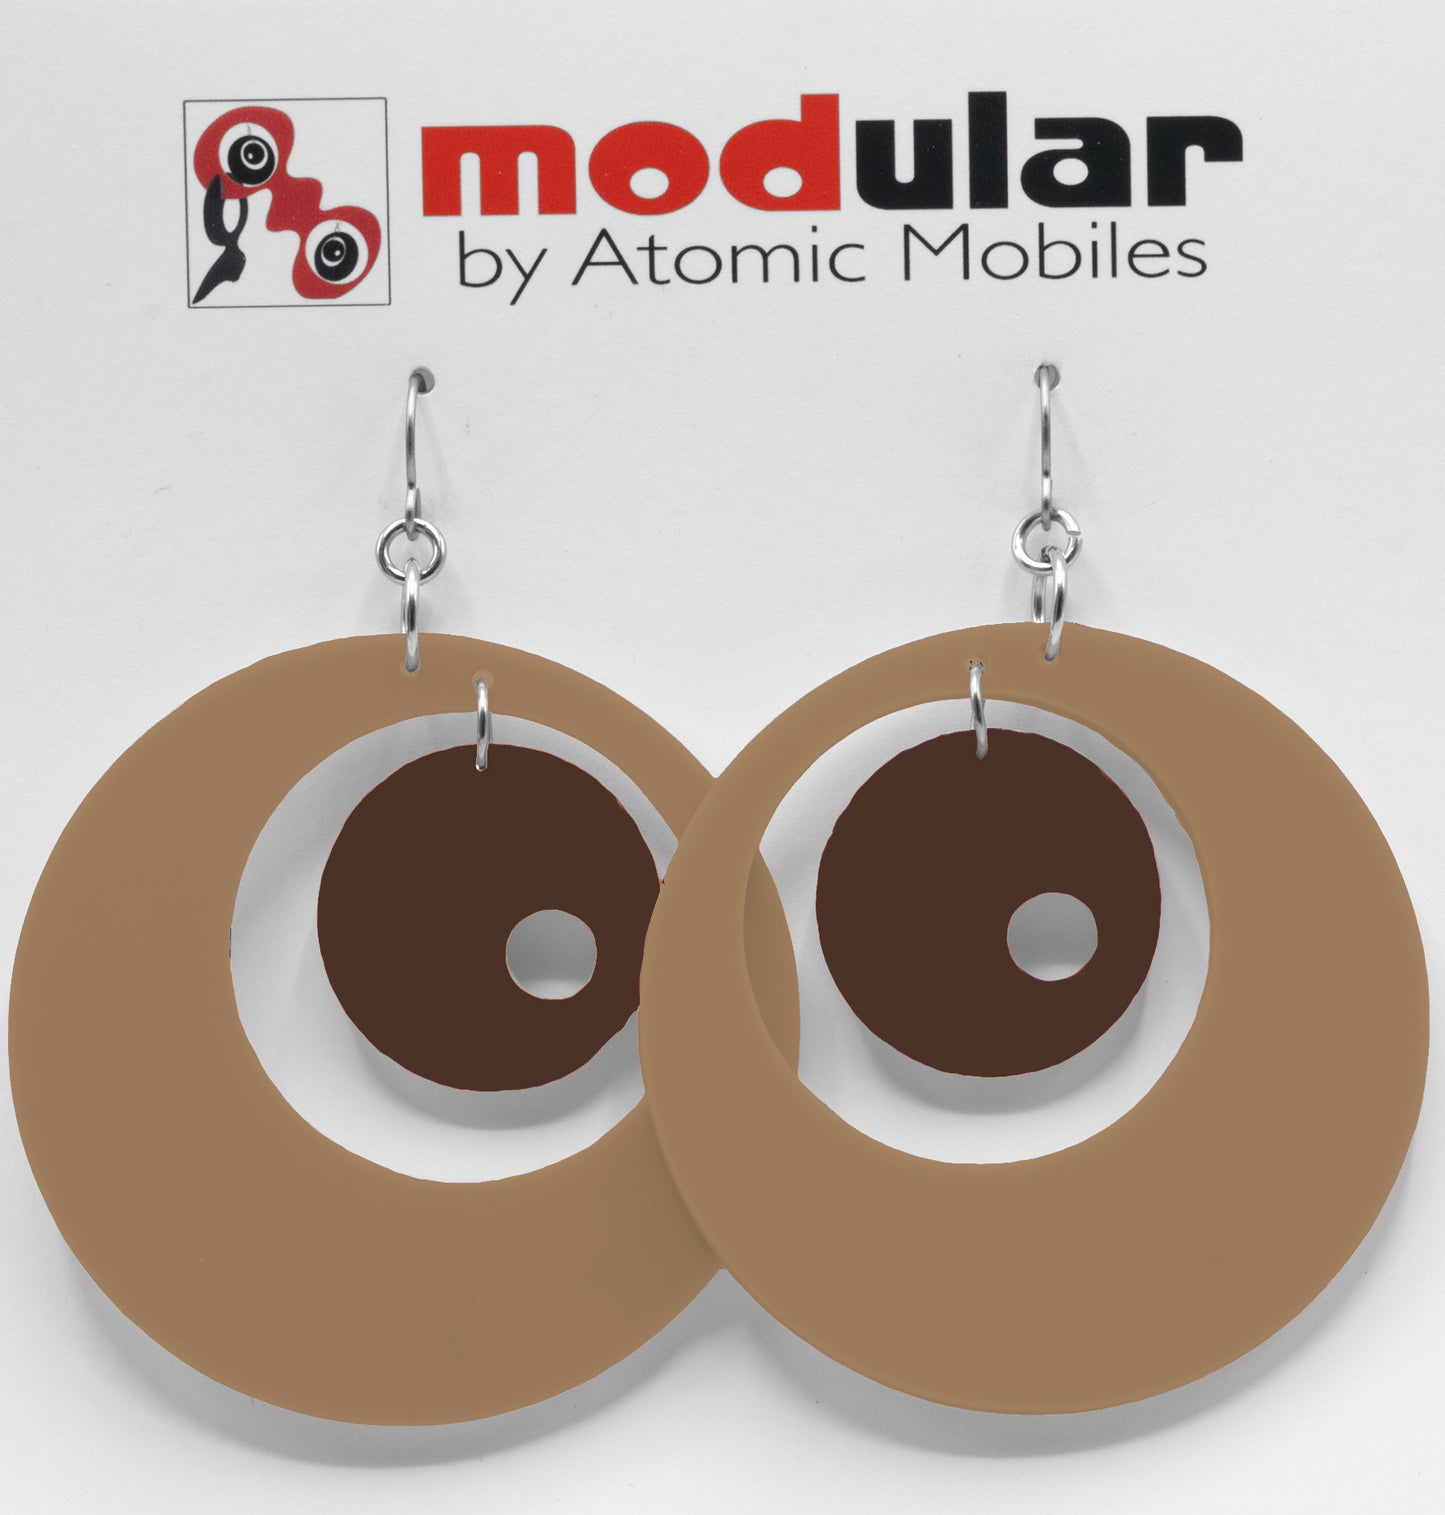 MODular Earrings - Groovy Statement Earrings in Beige Tan and Brown by AtomicMobiles.com - retro era inspired mod handmade jewelry